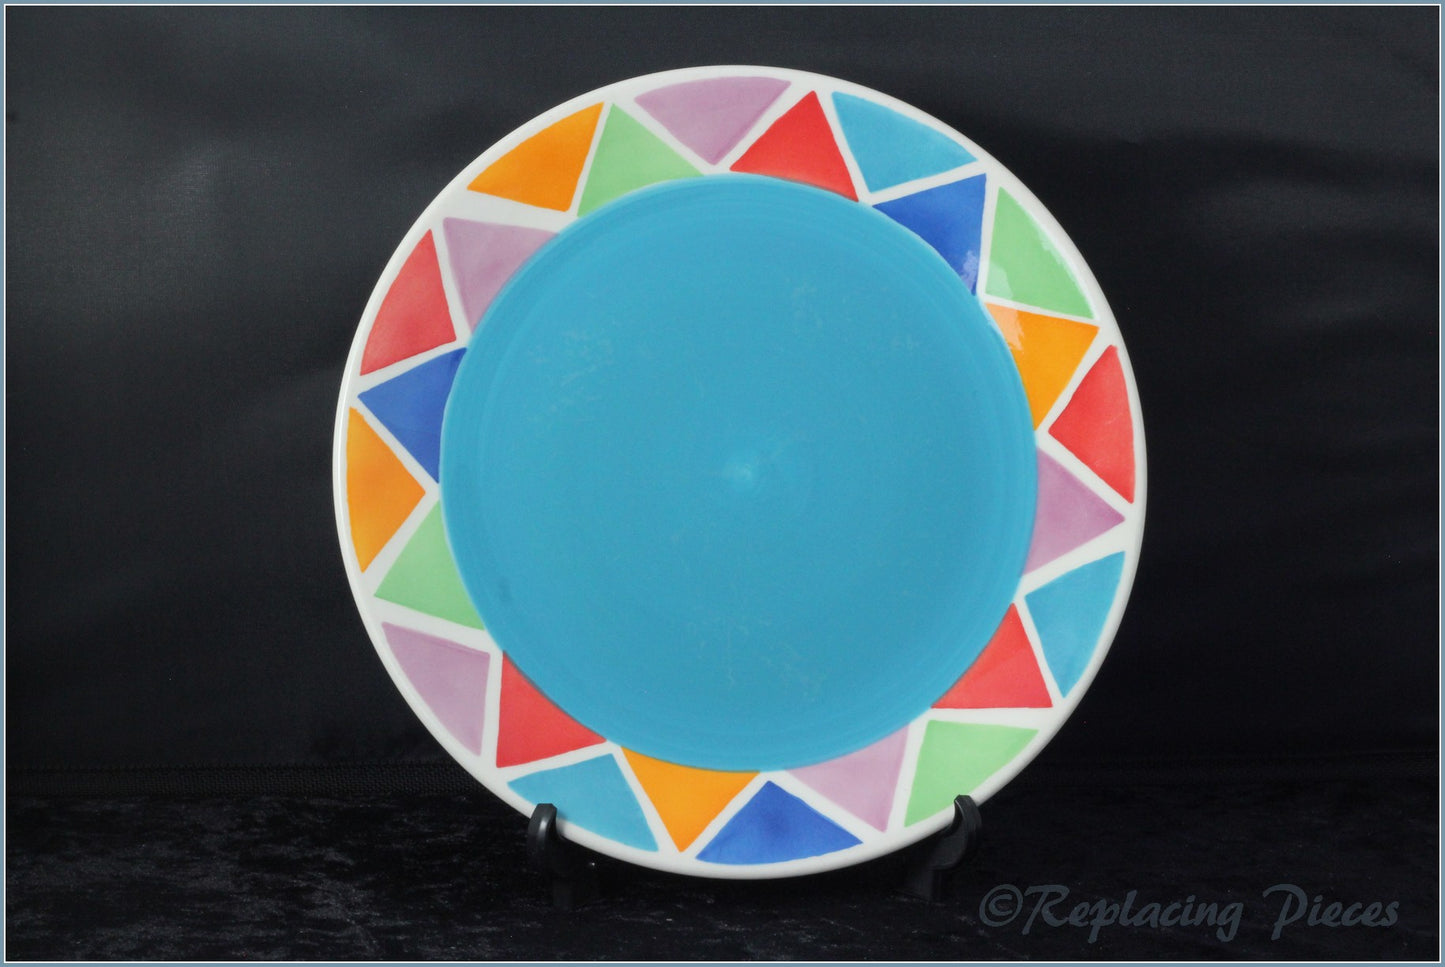 RPW15 - Whittards - Multi-coloured Triangles Salad Plate